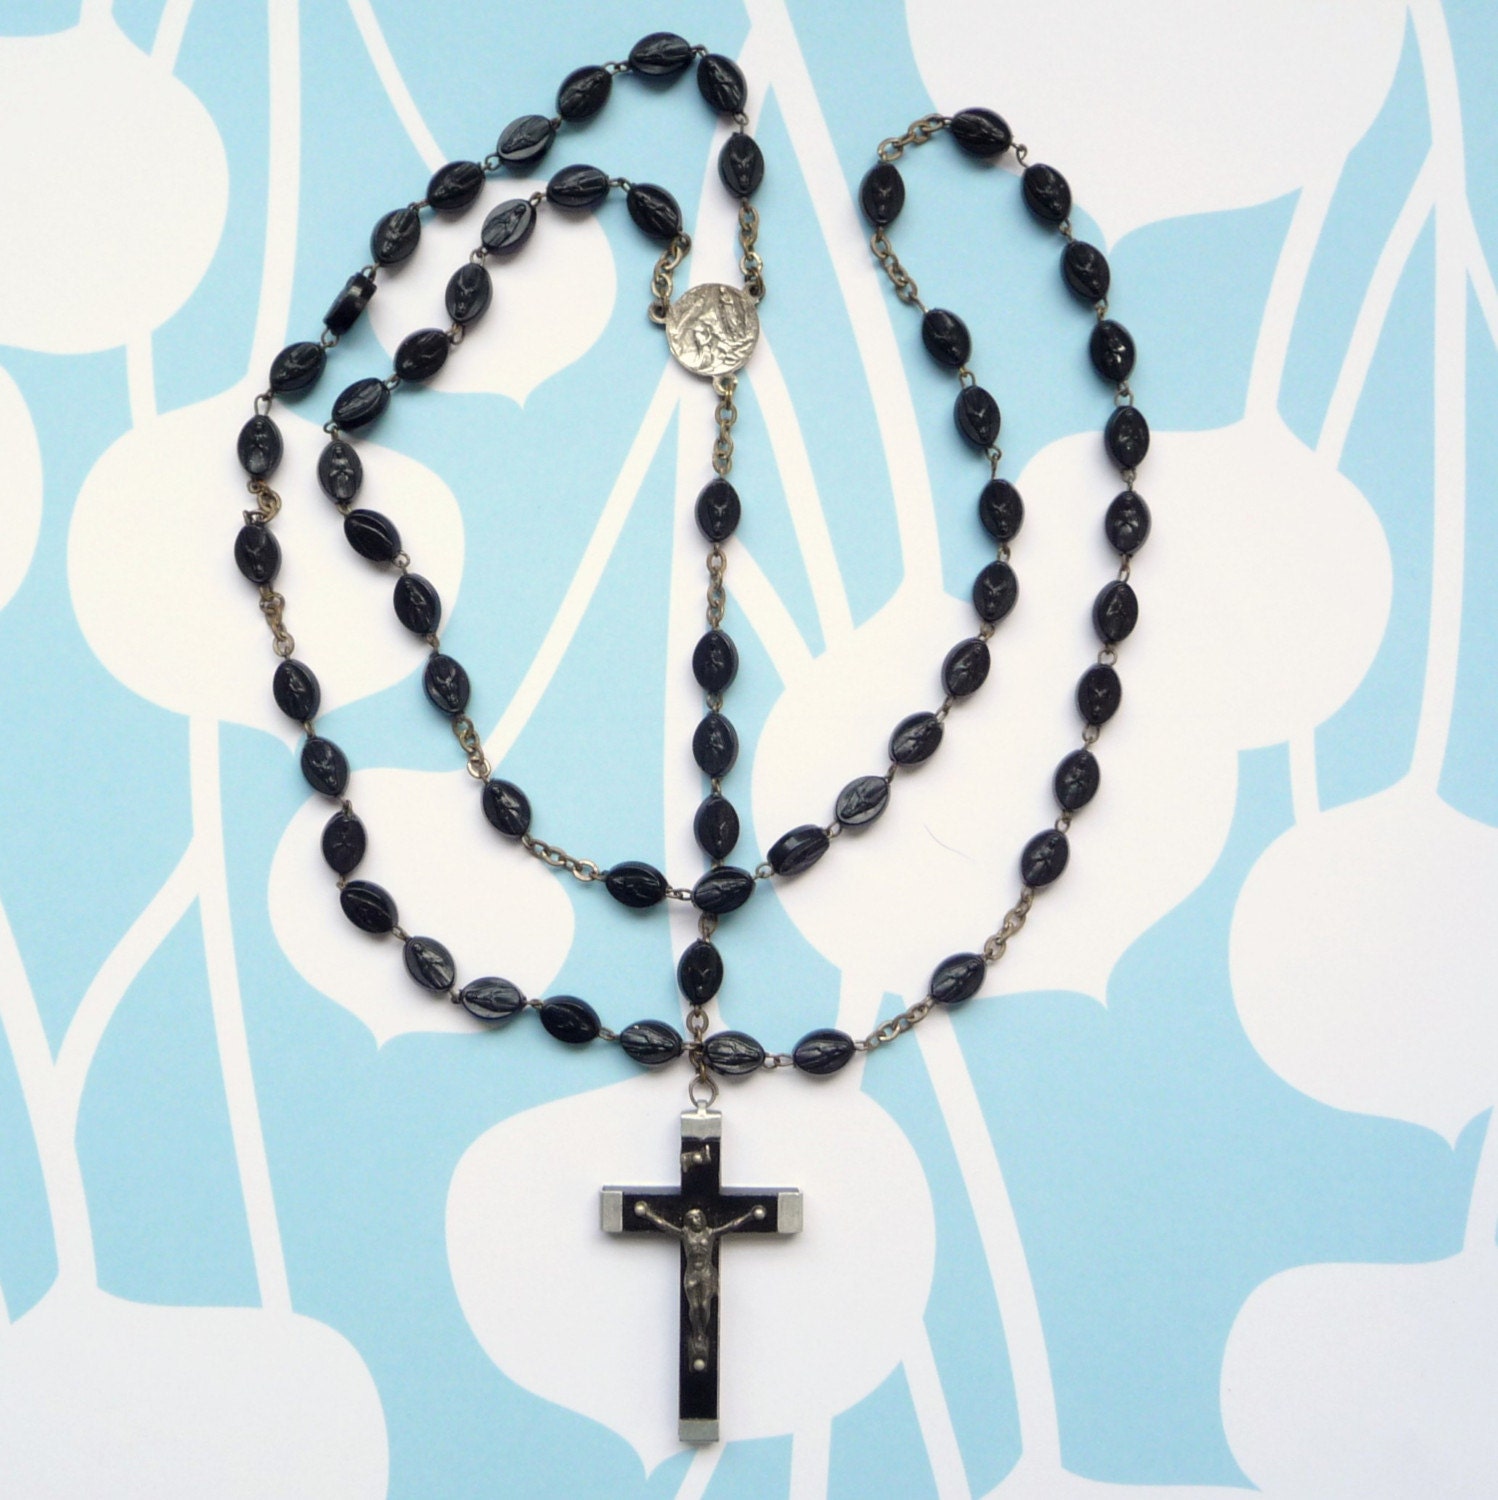 Vintage Black Rosary with Lourdes Water Reliquary and Virgin Mary Beads